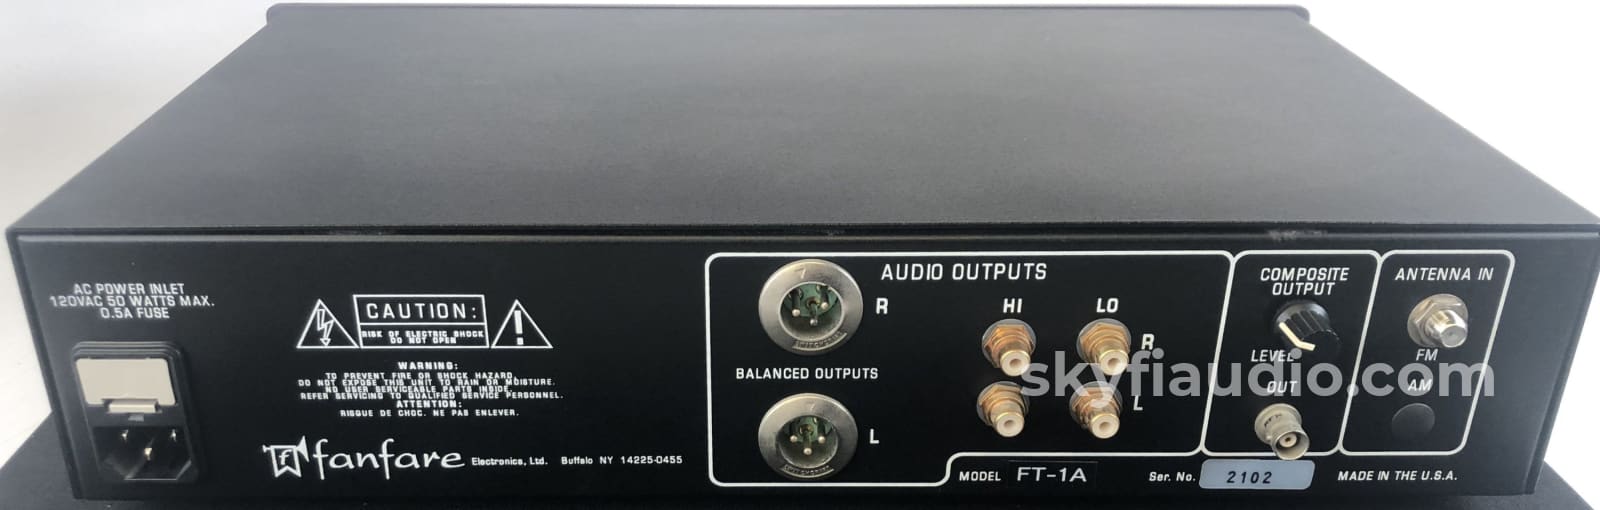 Fanfare Ft-1A Digital/Analog Fm Tuner With Remote - Stereophile Class A Rated Component